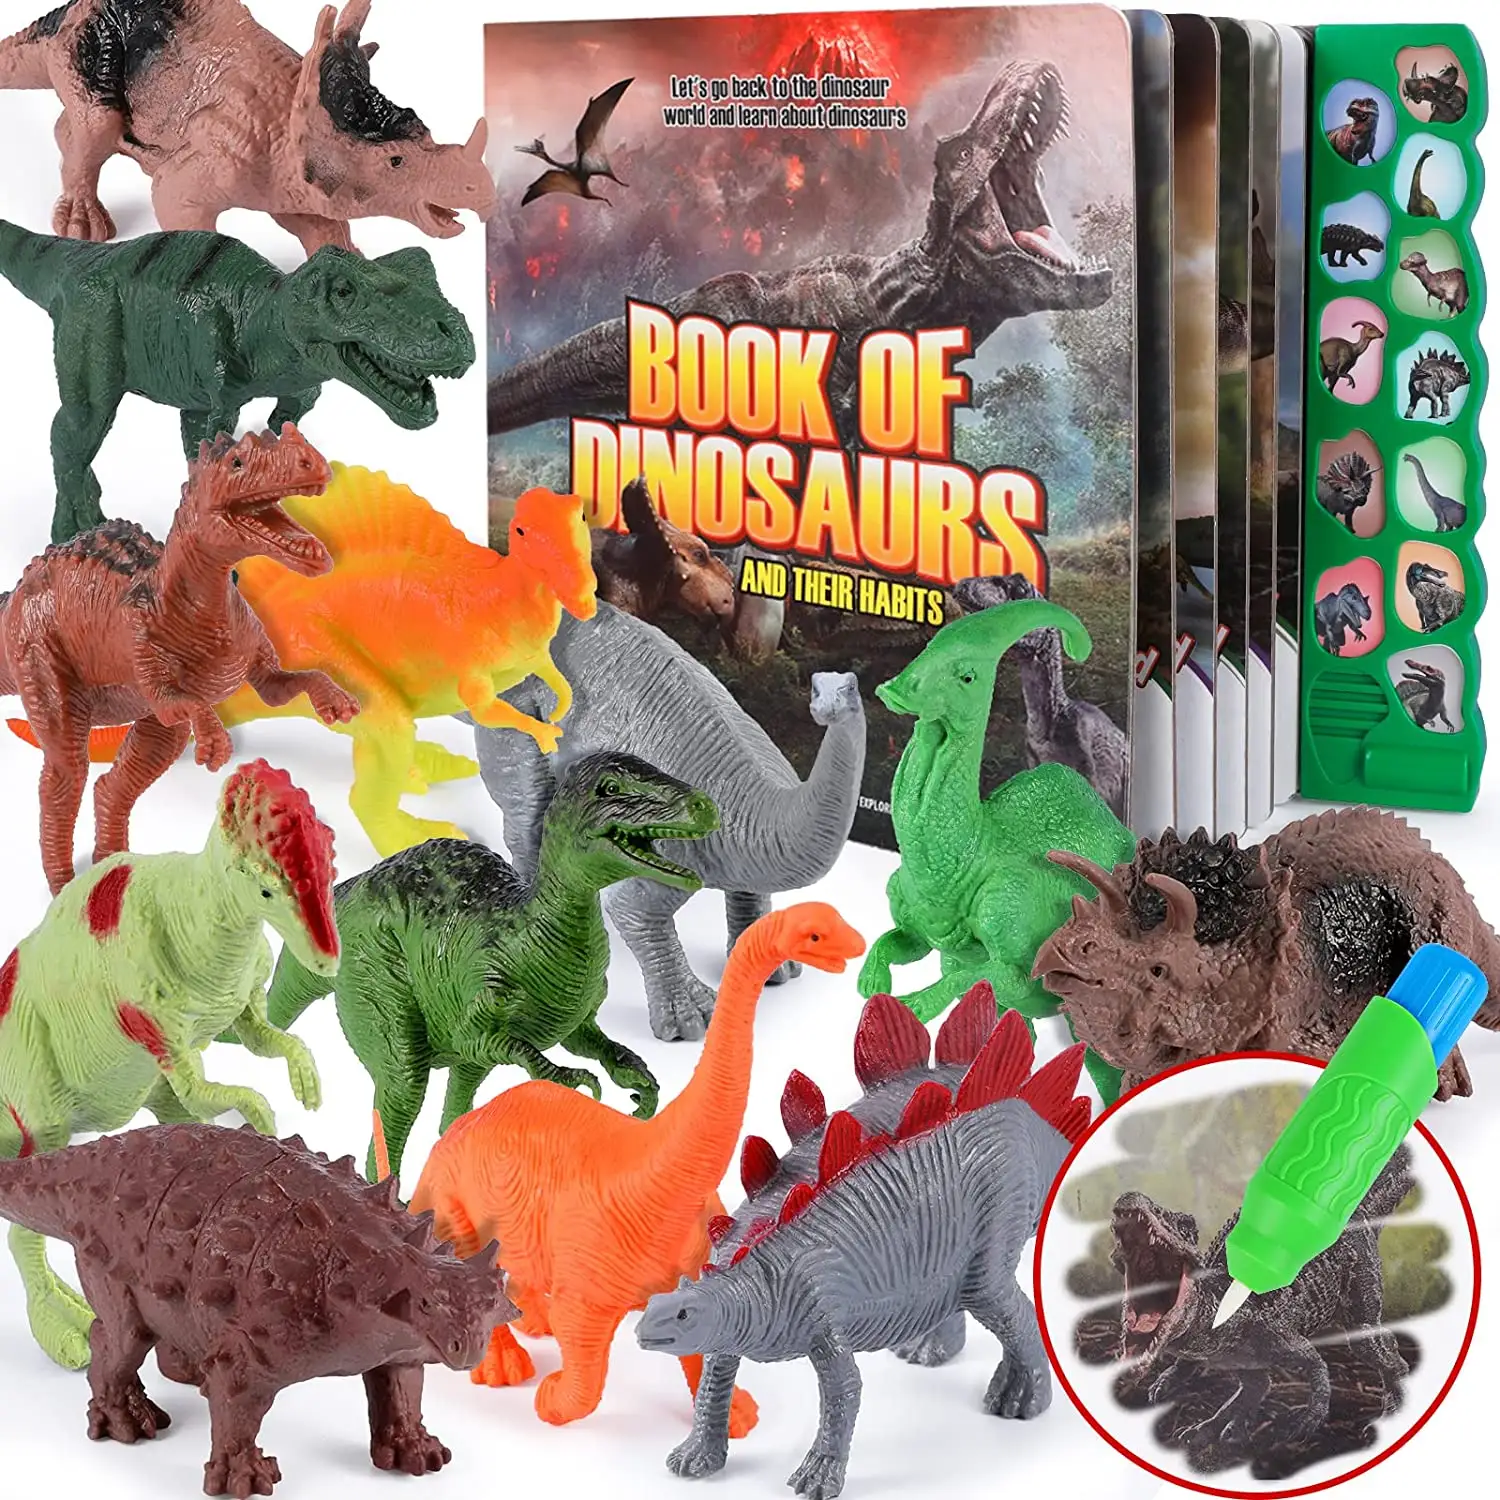 Dinosaur Toys for Kids 3-5 Interactive Dinosaur Sound Book with Exclusive Magic Water Painting 12 Realistic Dinosaur Figures